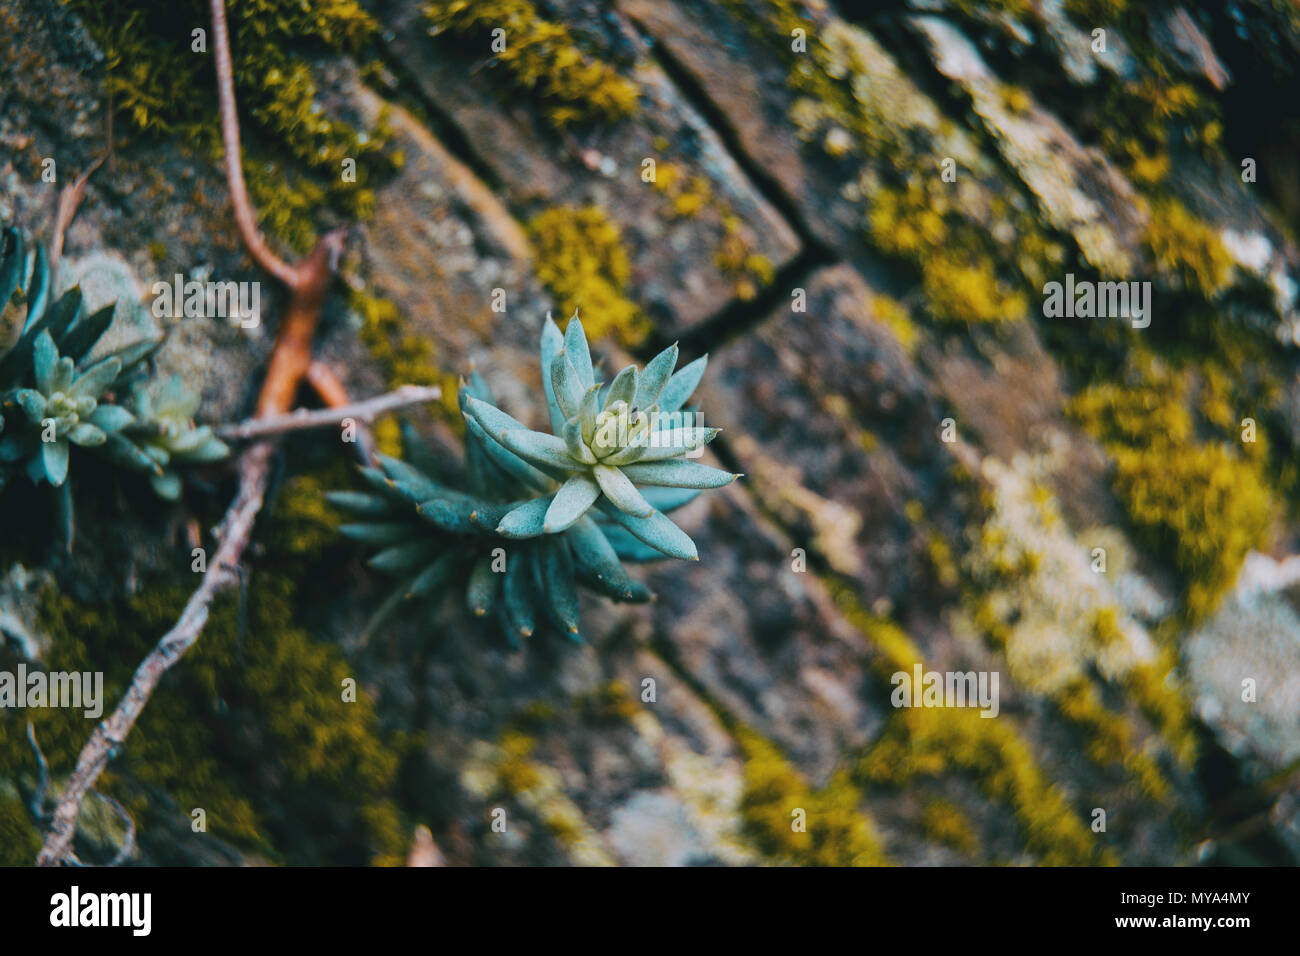 Sedum plant in the wall of a stone wall in the mountain with moss Stock Photo